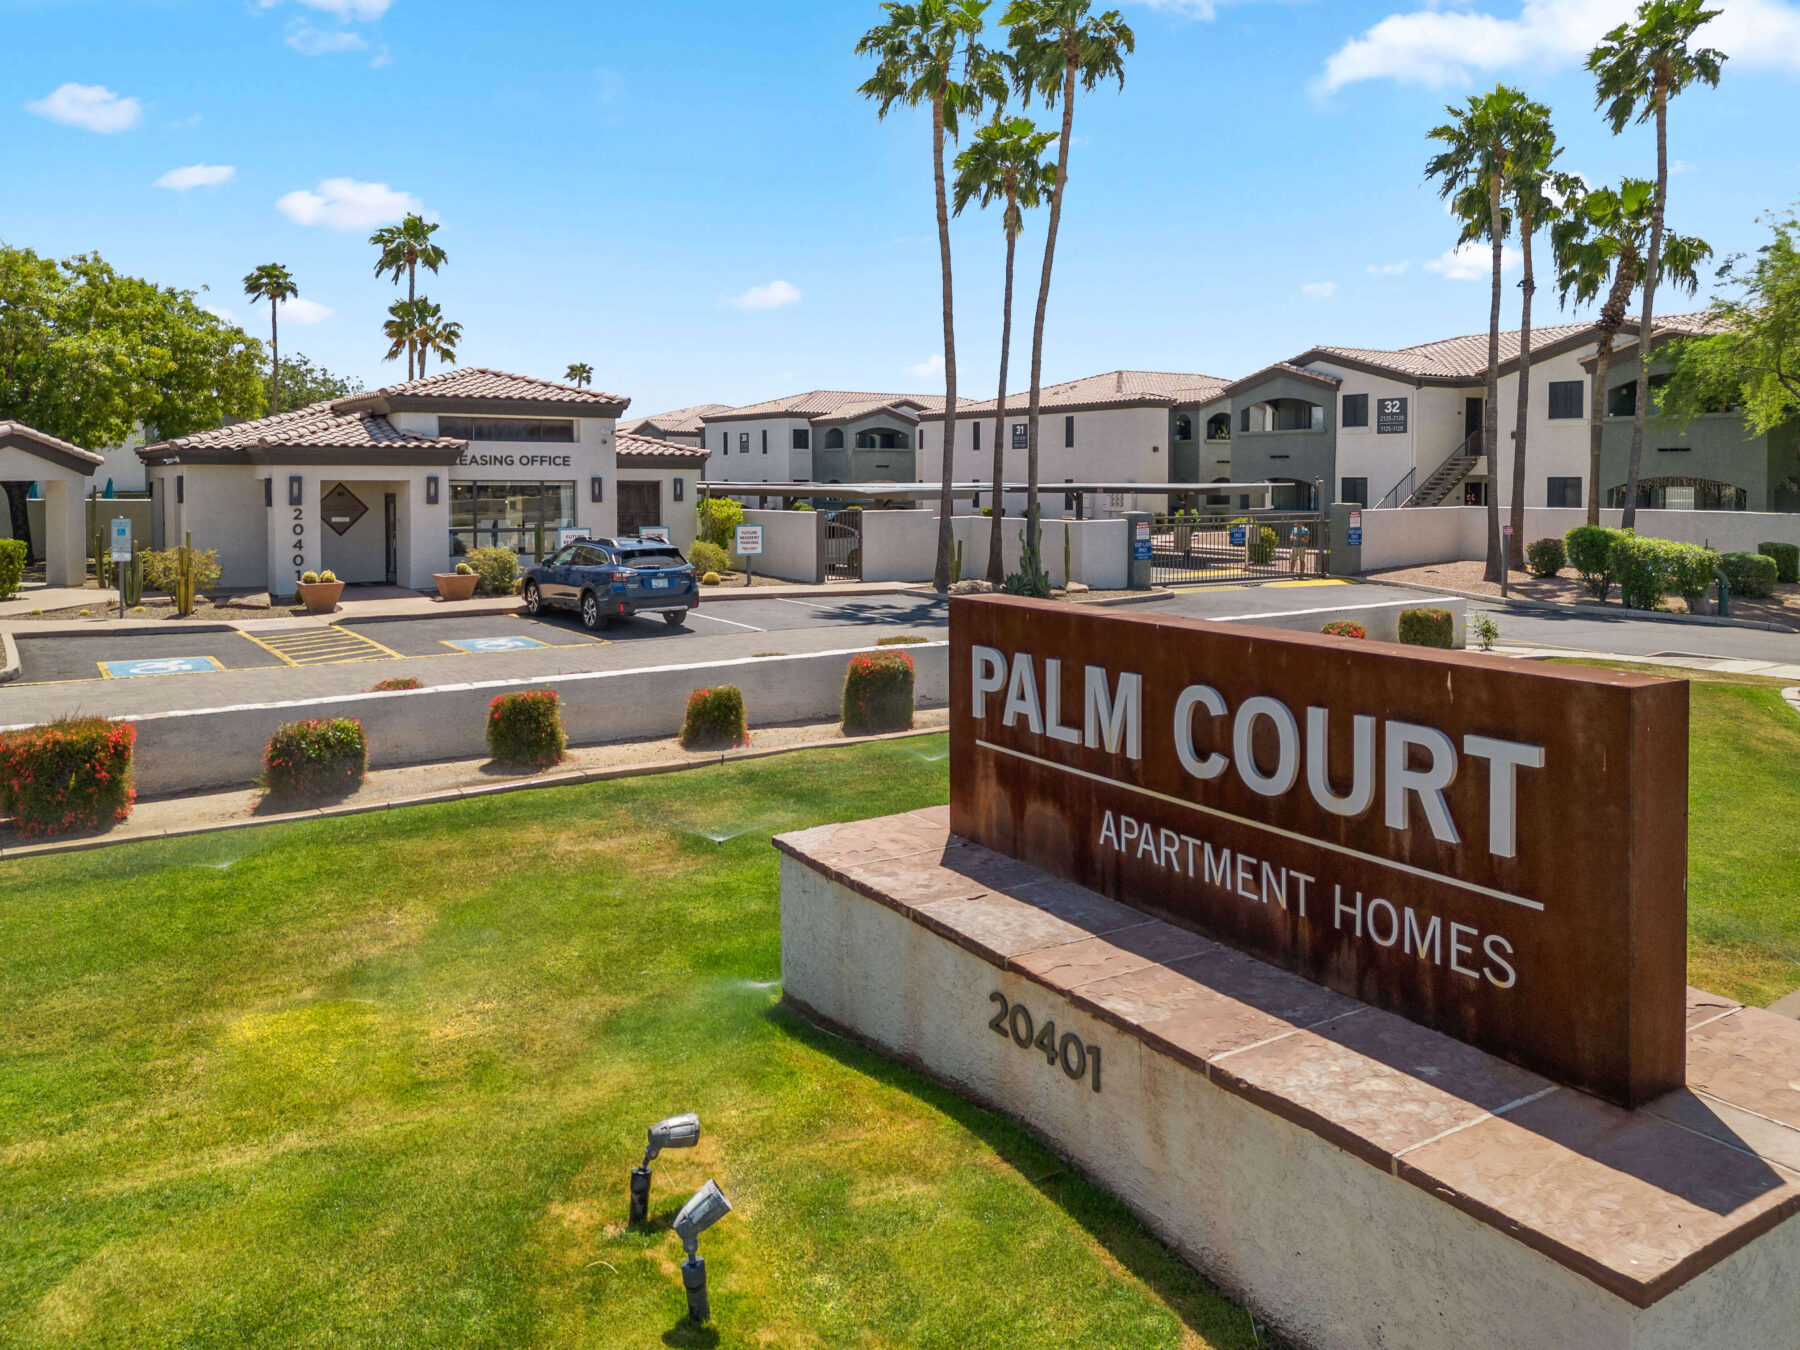 Property signs that reads Palm Court Apartment Homes